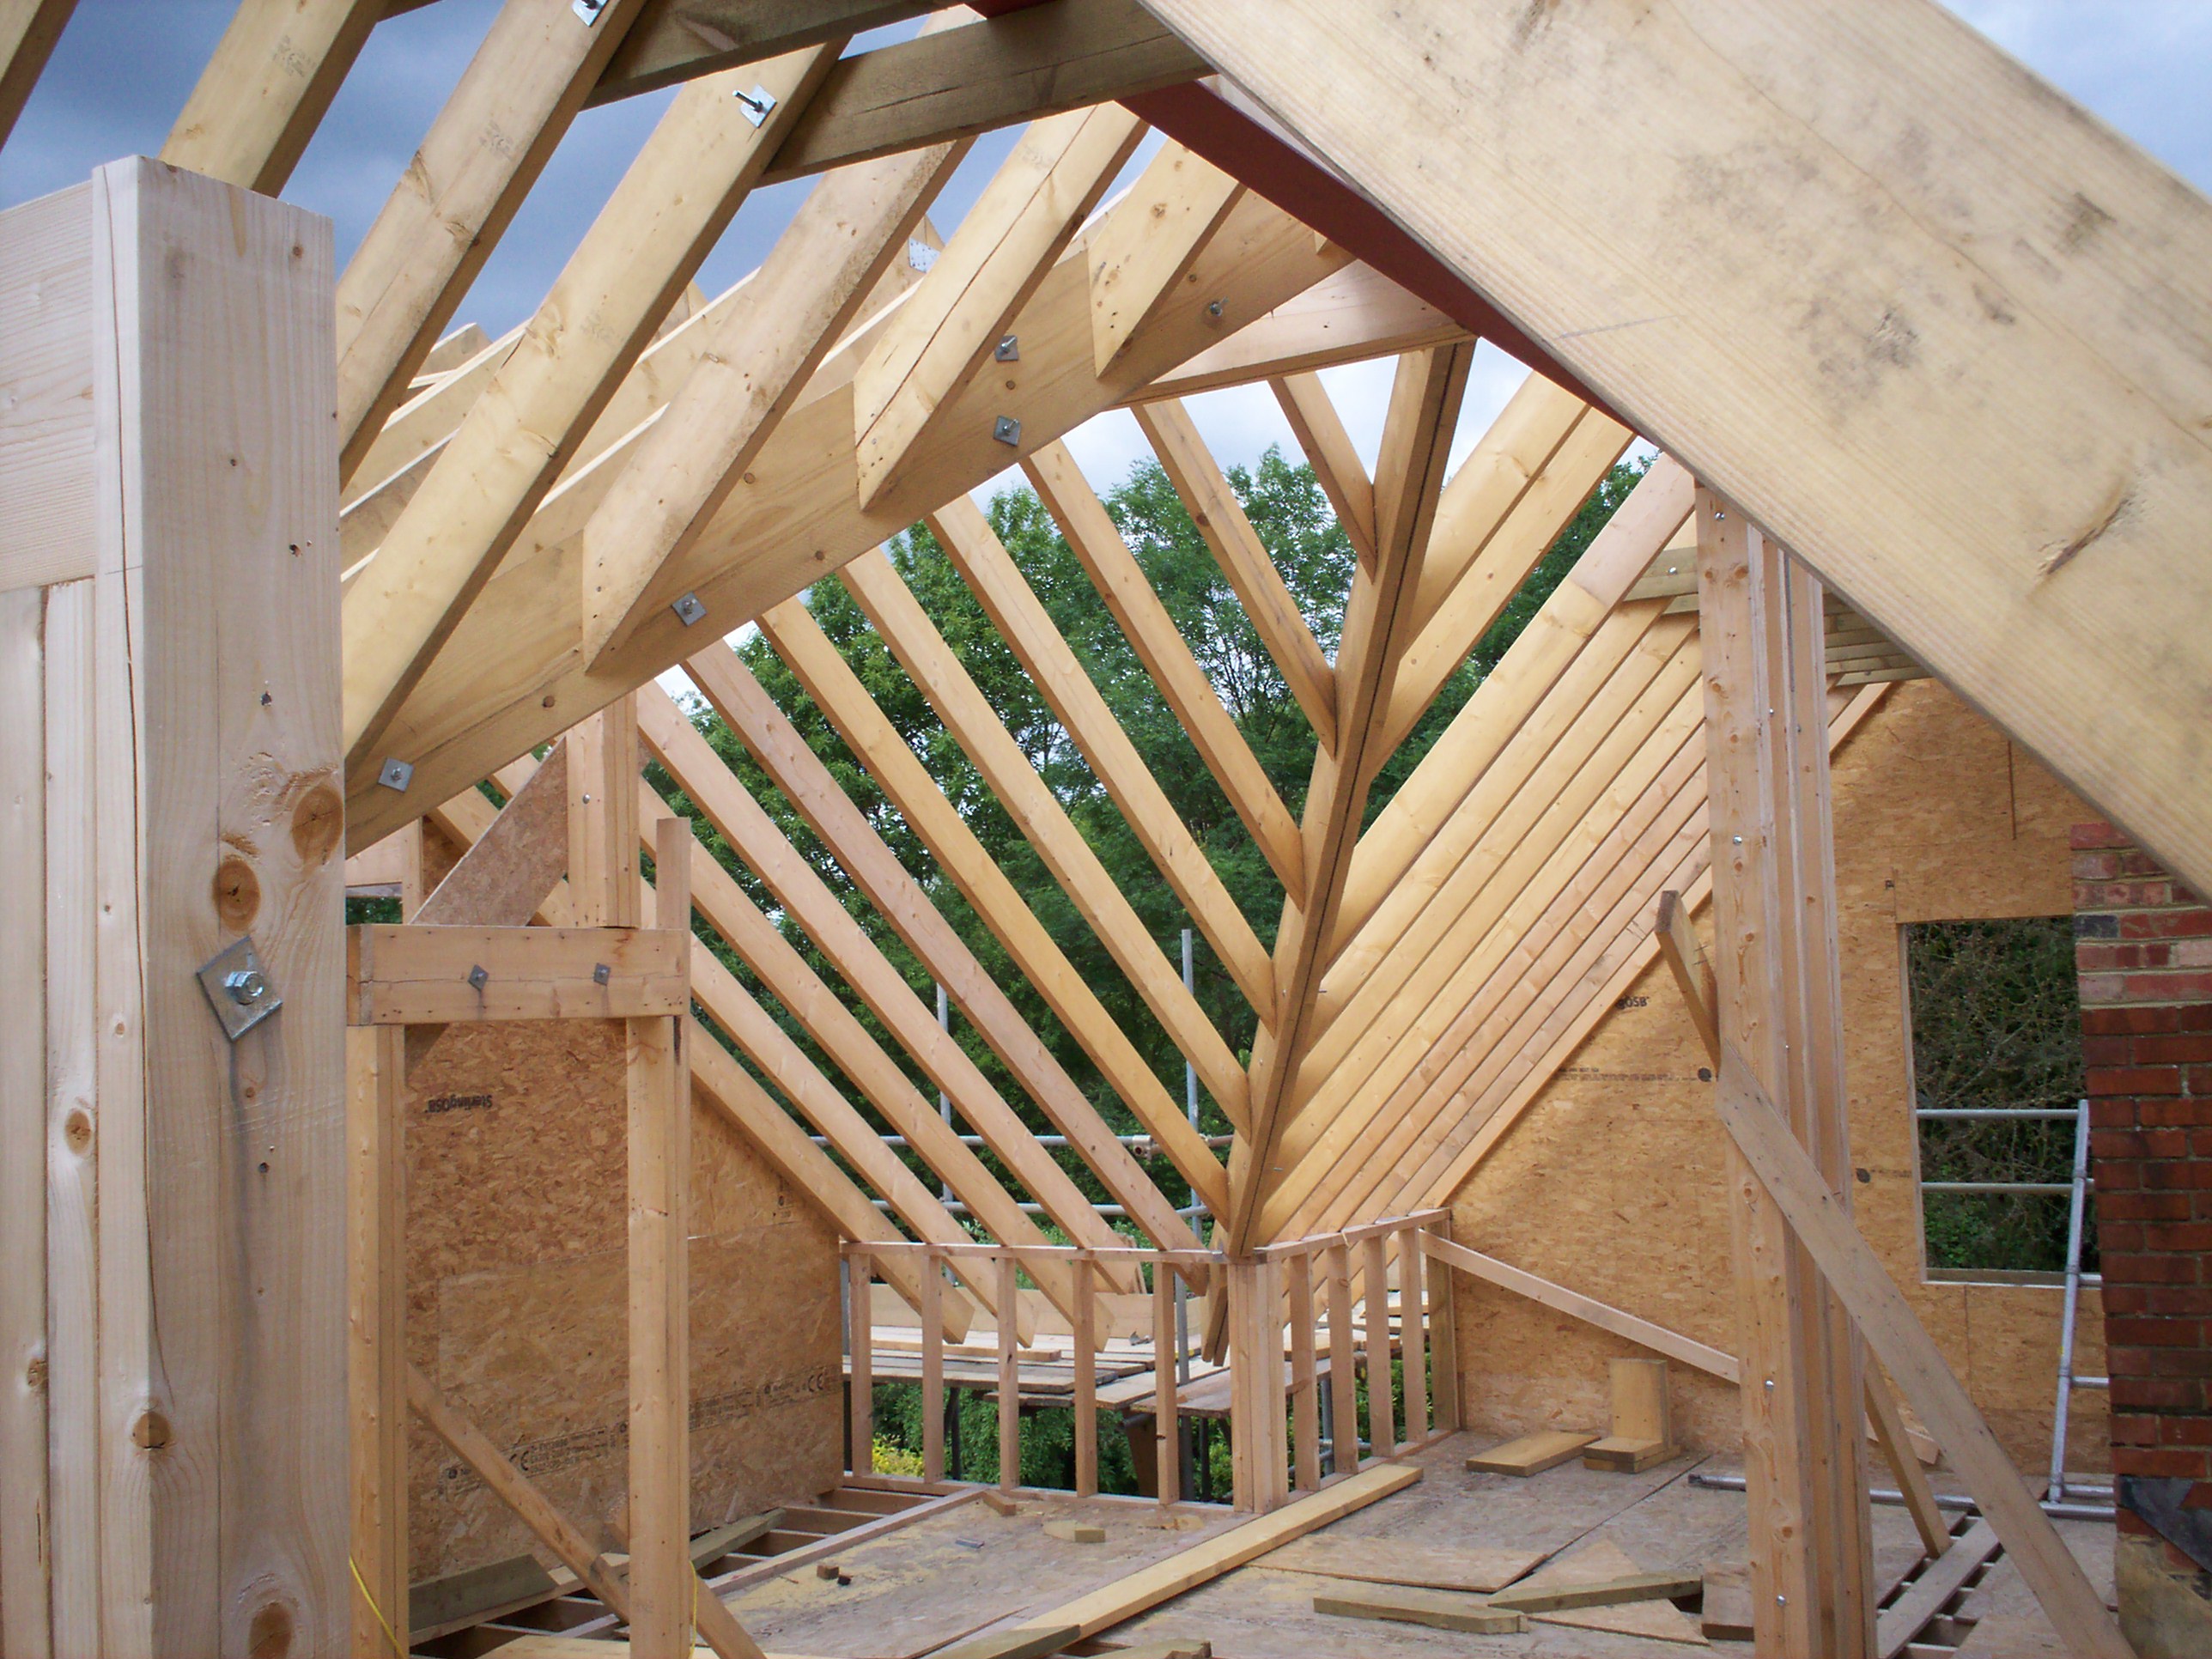 Timber frame build with cut and pitch roof - AN Carpentry